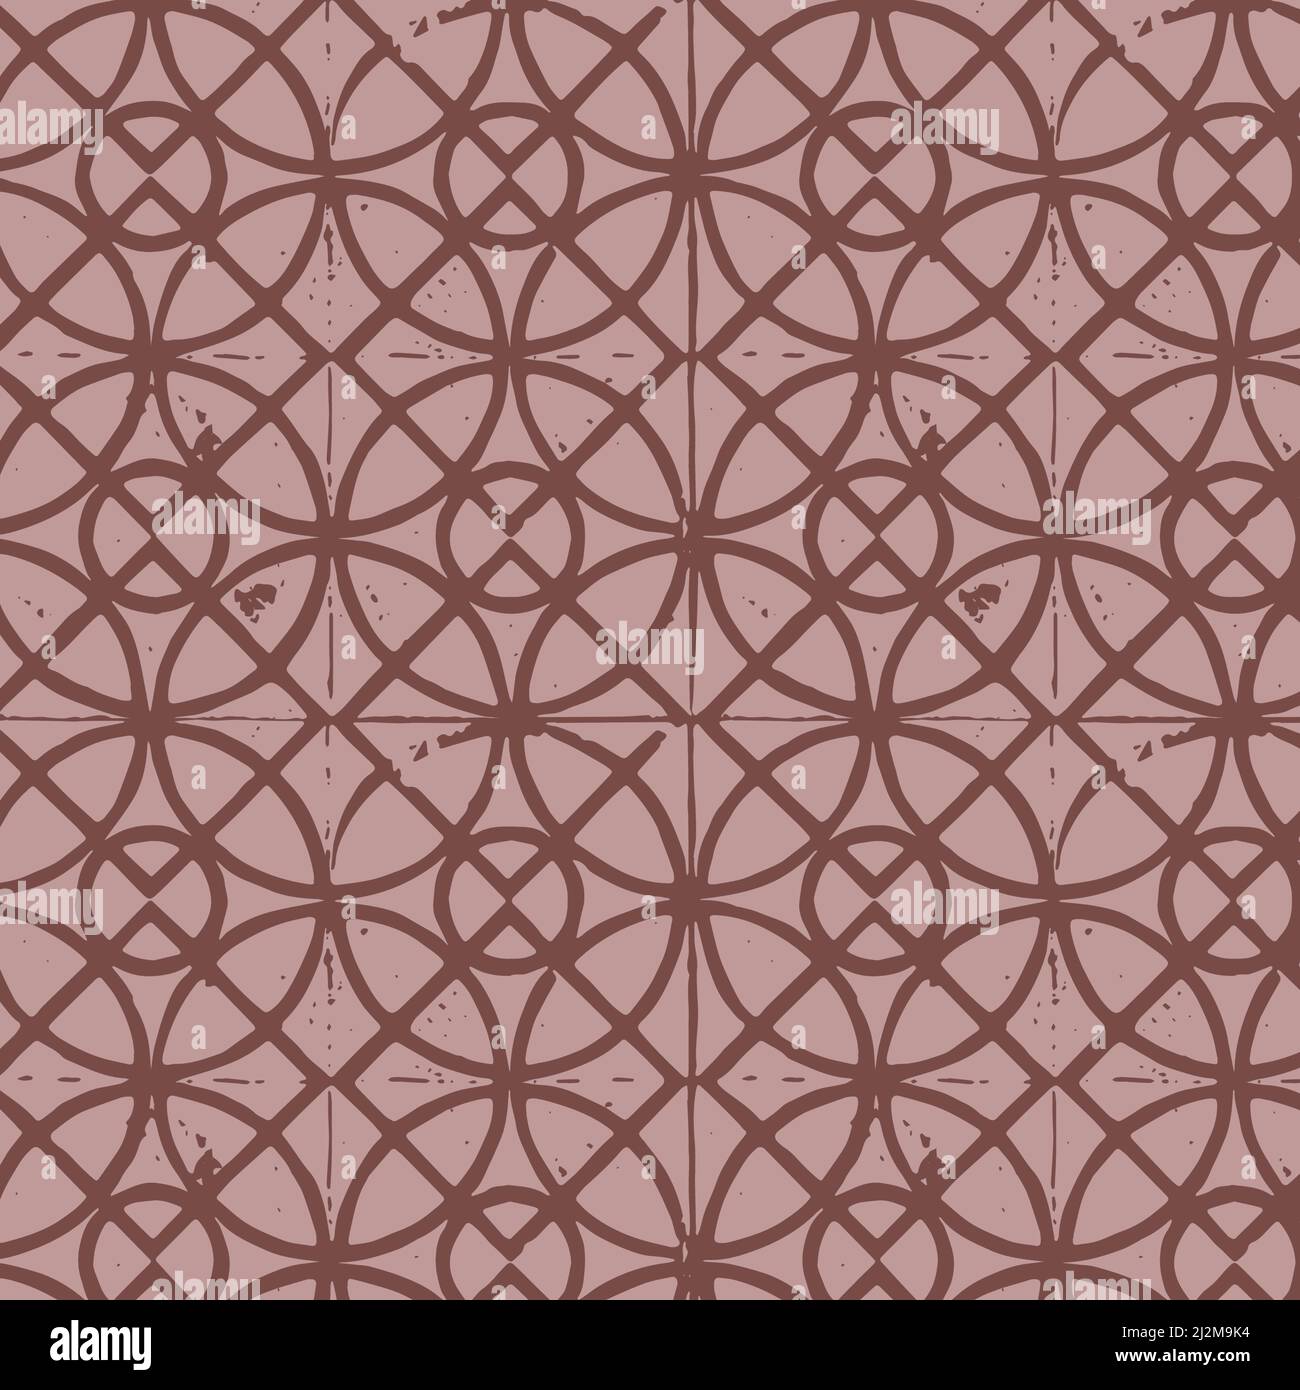 Antique tile repeating pattern background a seamless pattern in dusty rose and brick red for design elements. Stock Photo